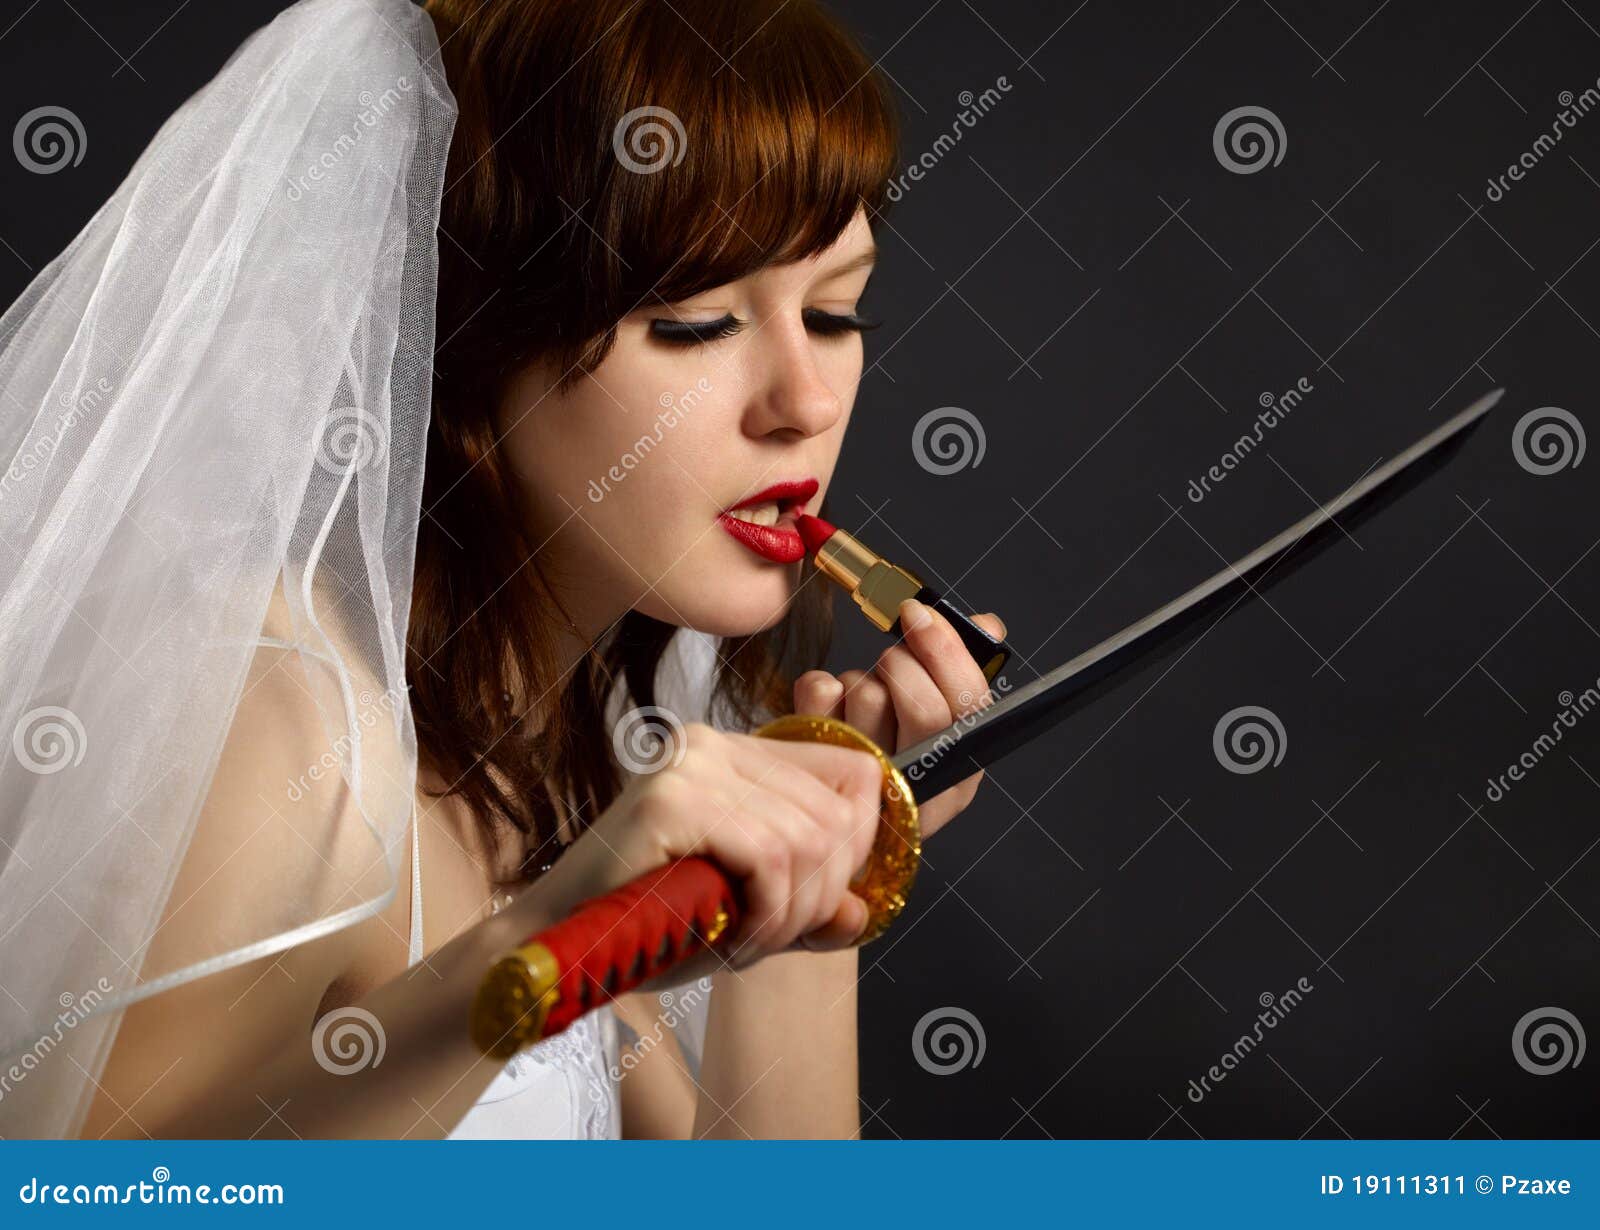 Girl Lipstick Looking at Blade of Sword Stock Image - Image of ...